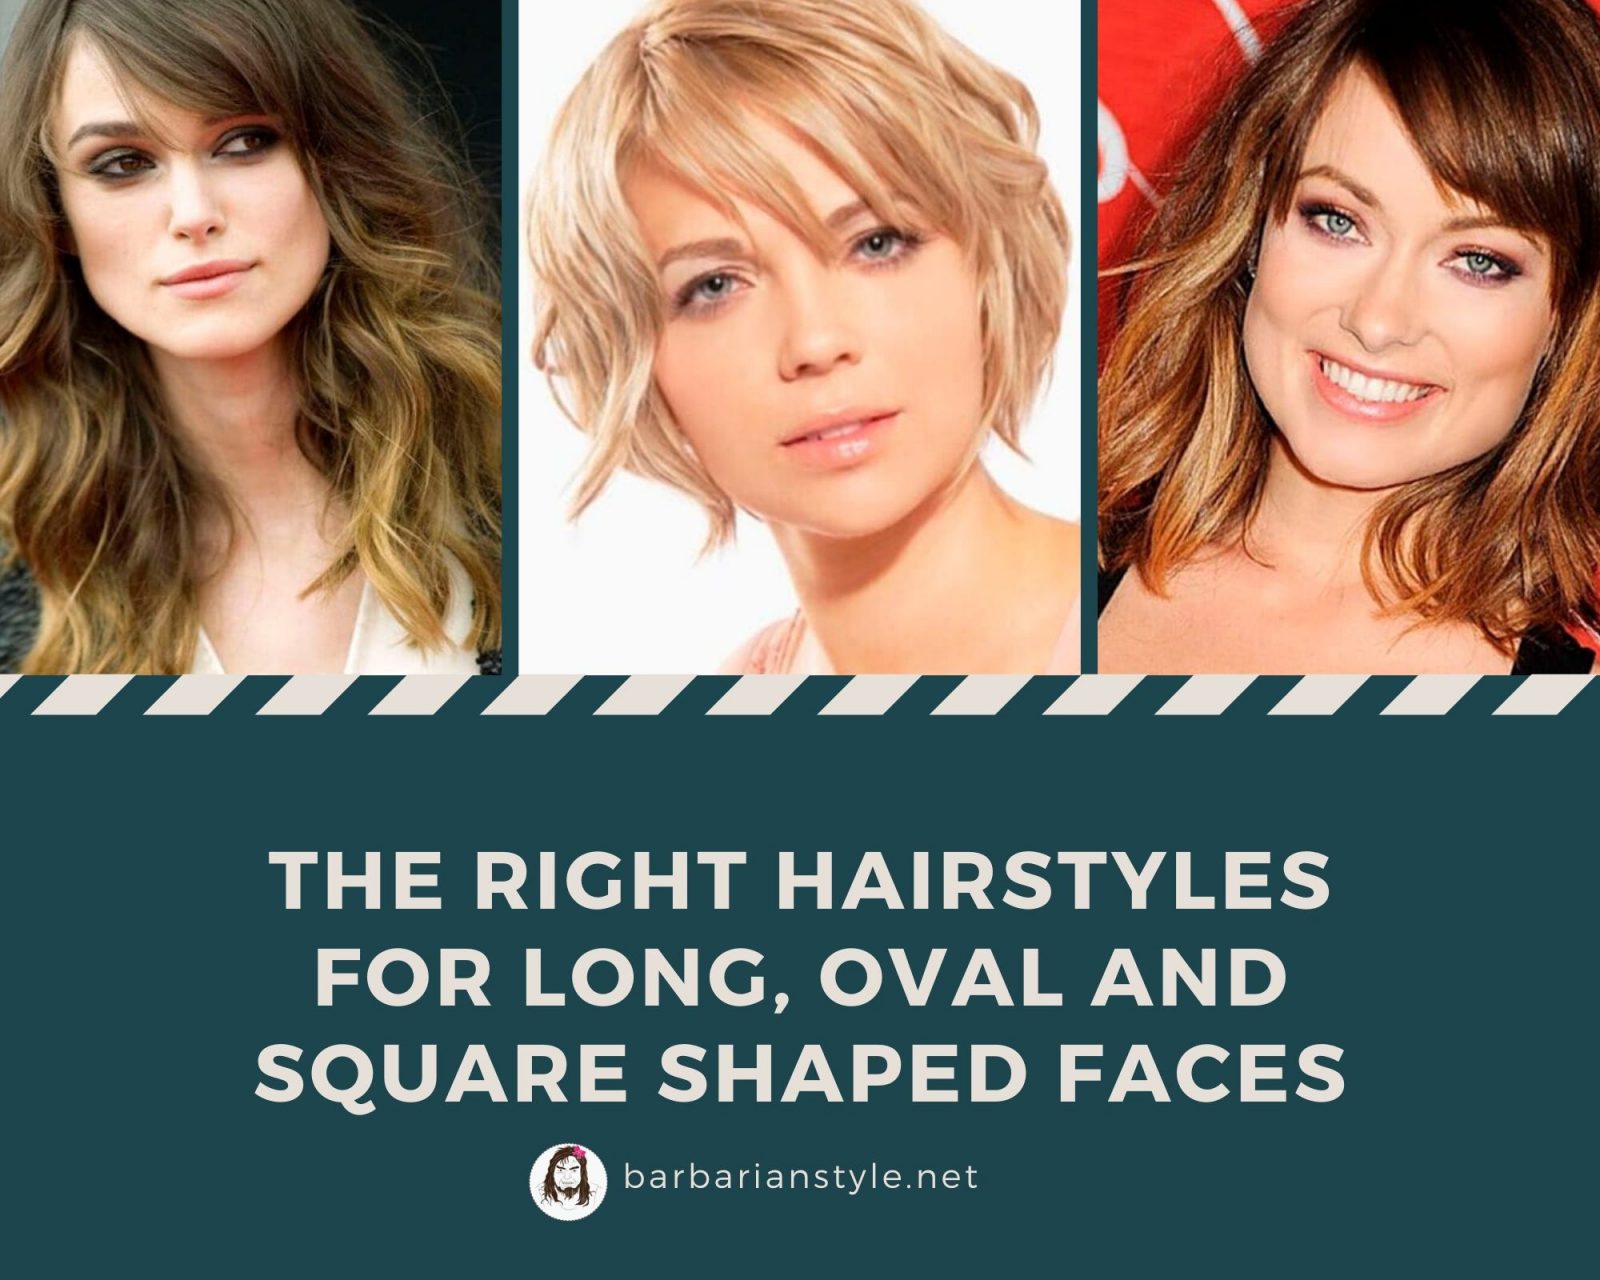  The Right Hairstyles  for Long Oval and Square Shaped Faces